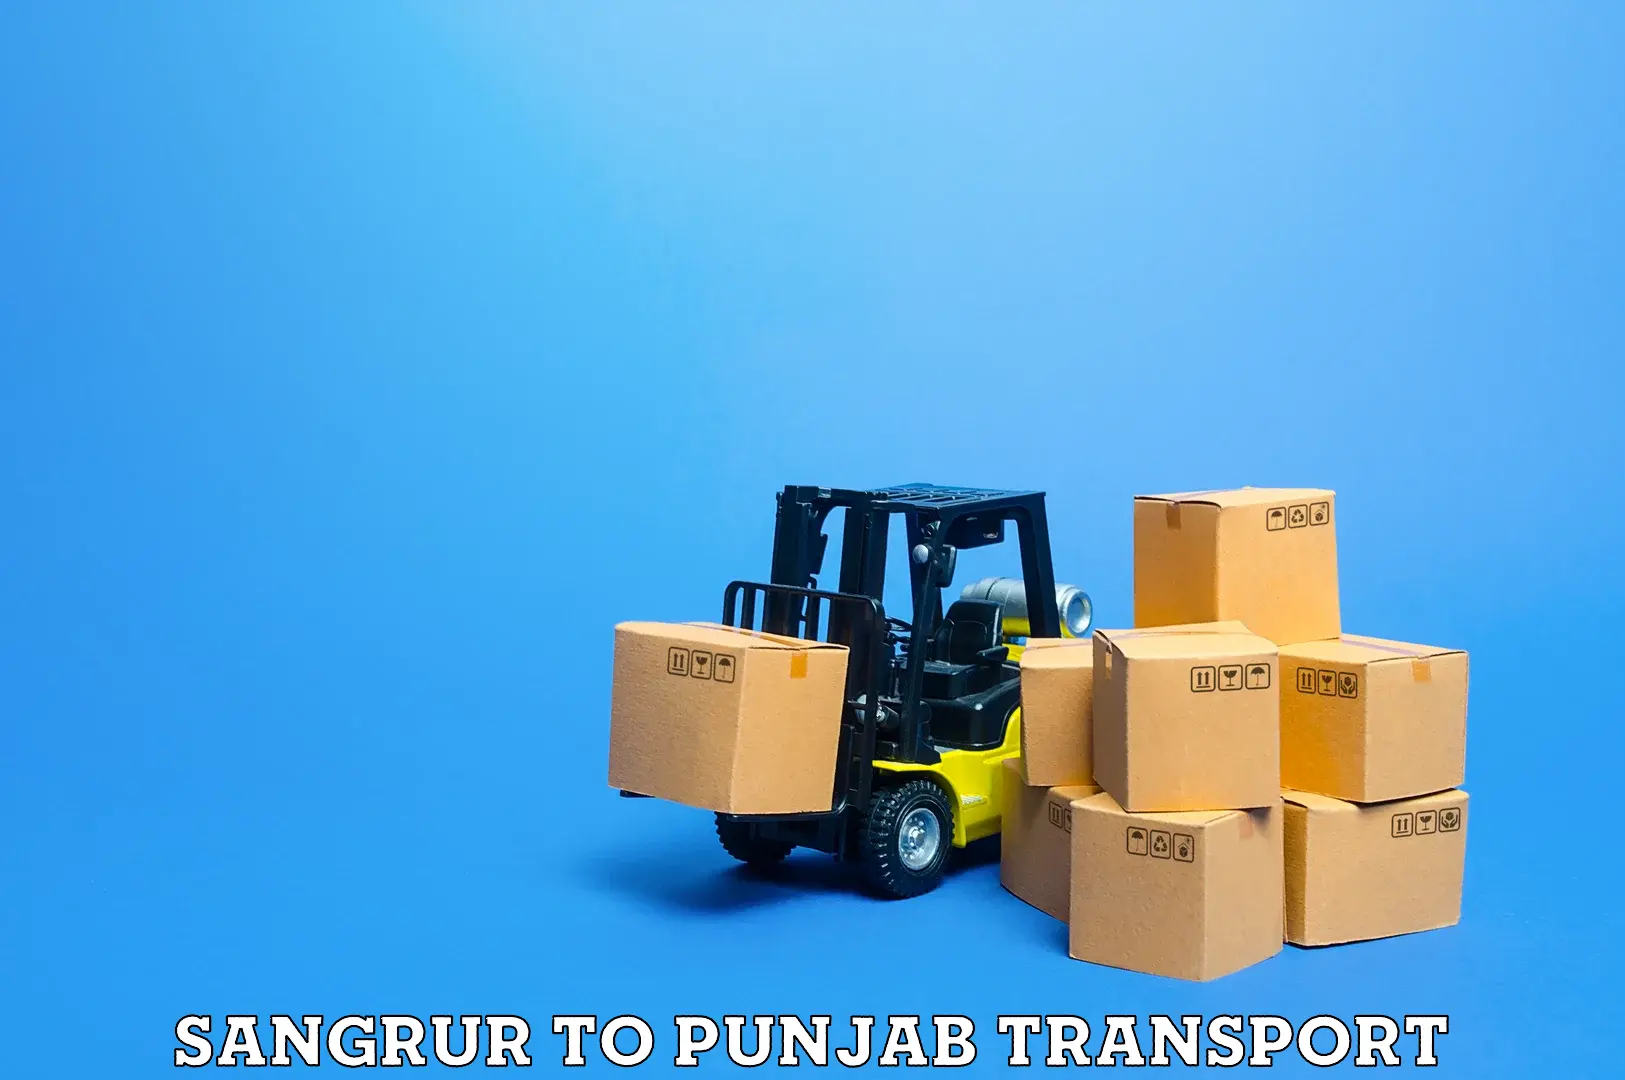 Transport bike from one state to another in Sangrur to Punjab